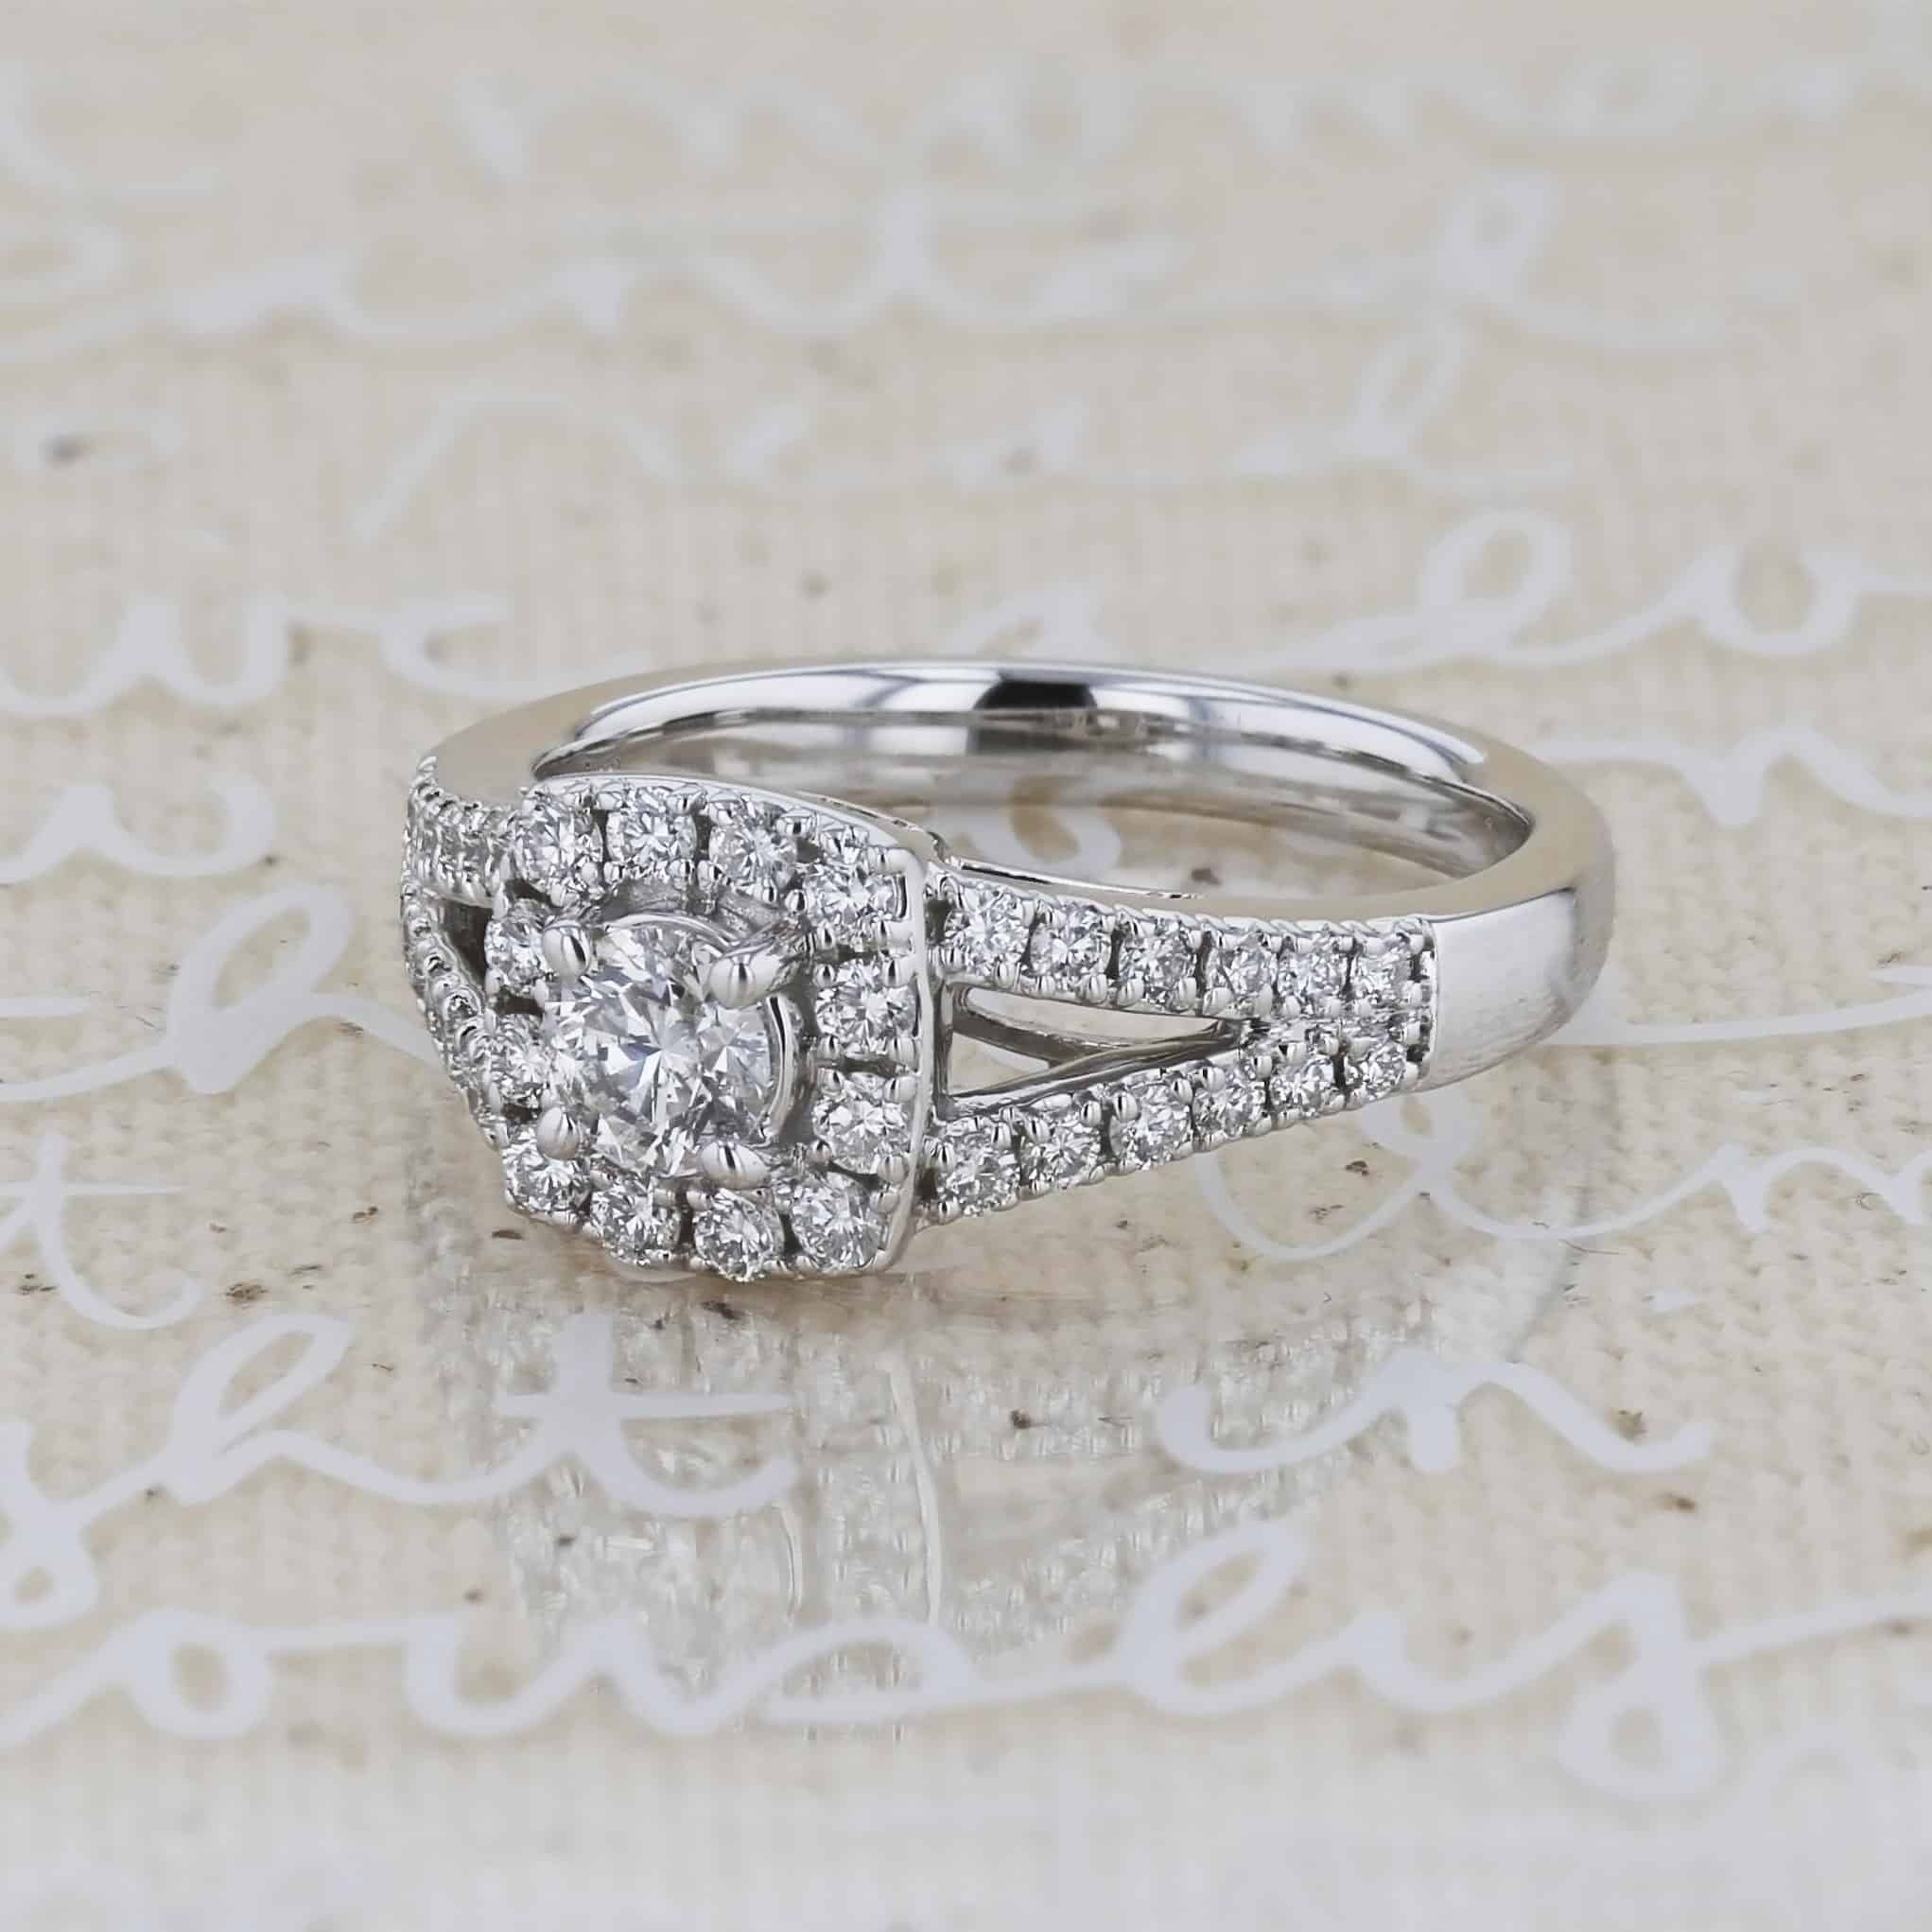 shop for your dream engagement ring